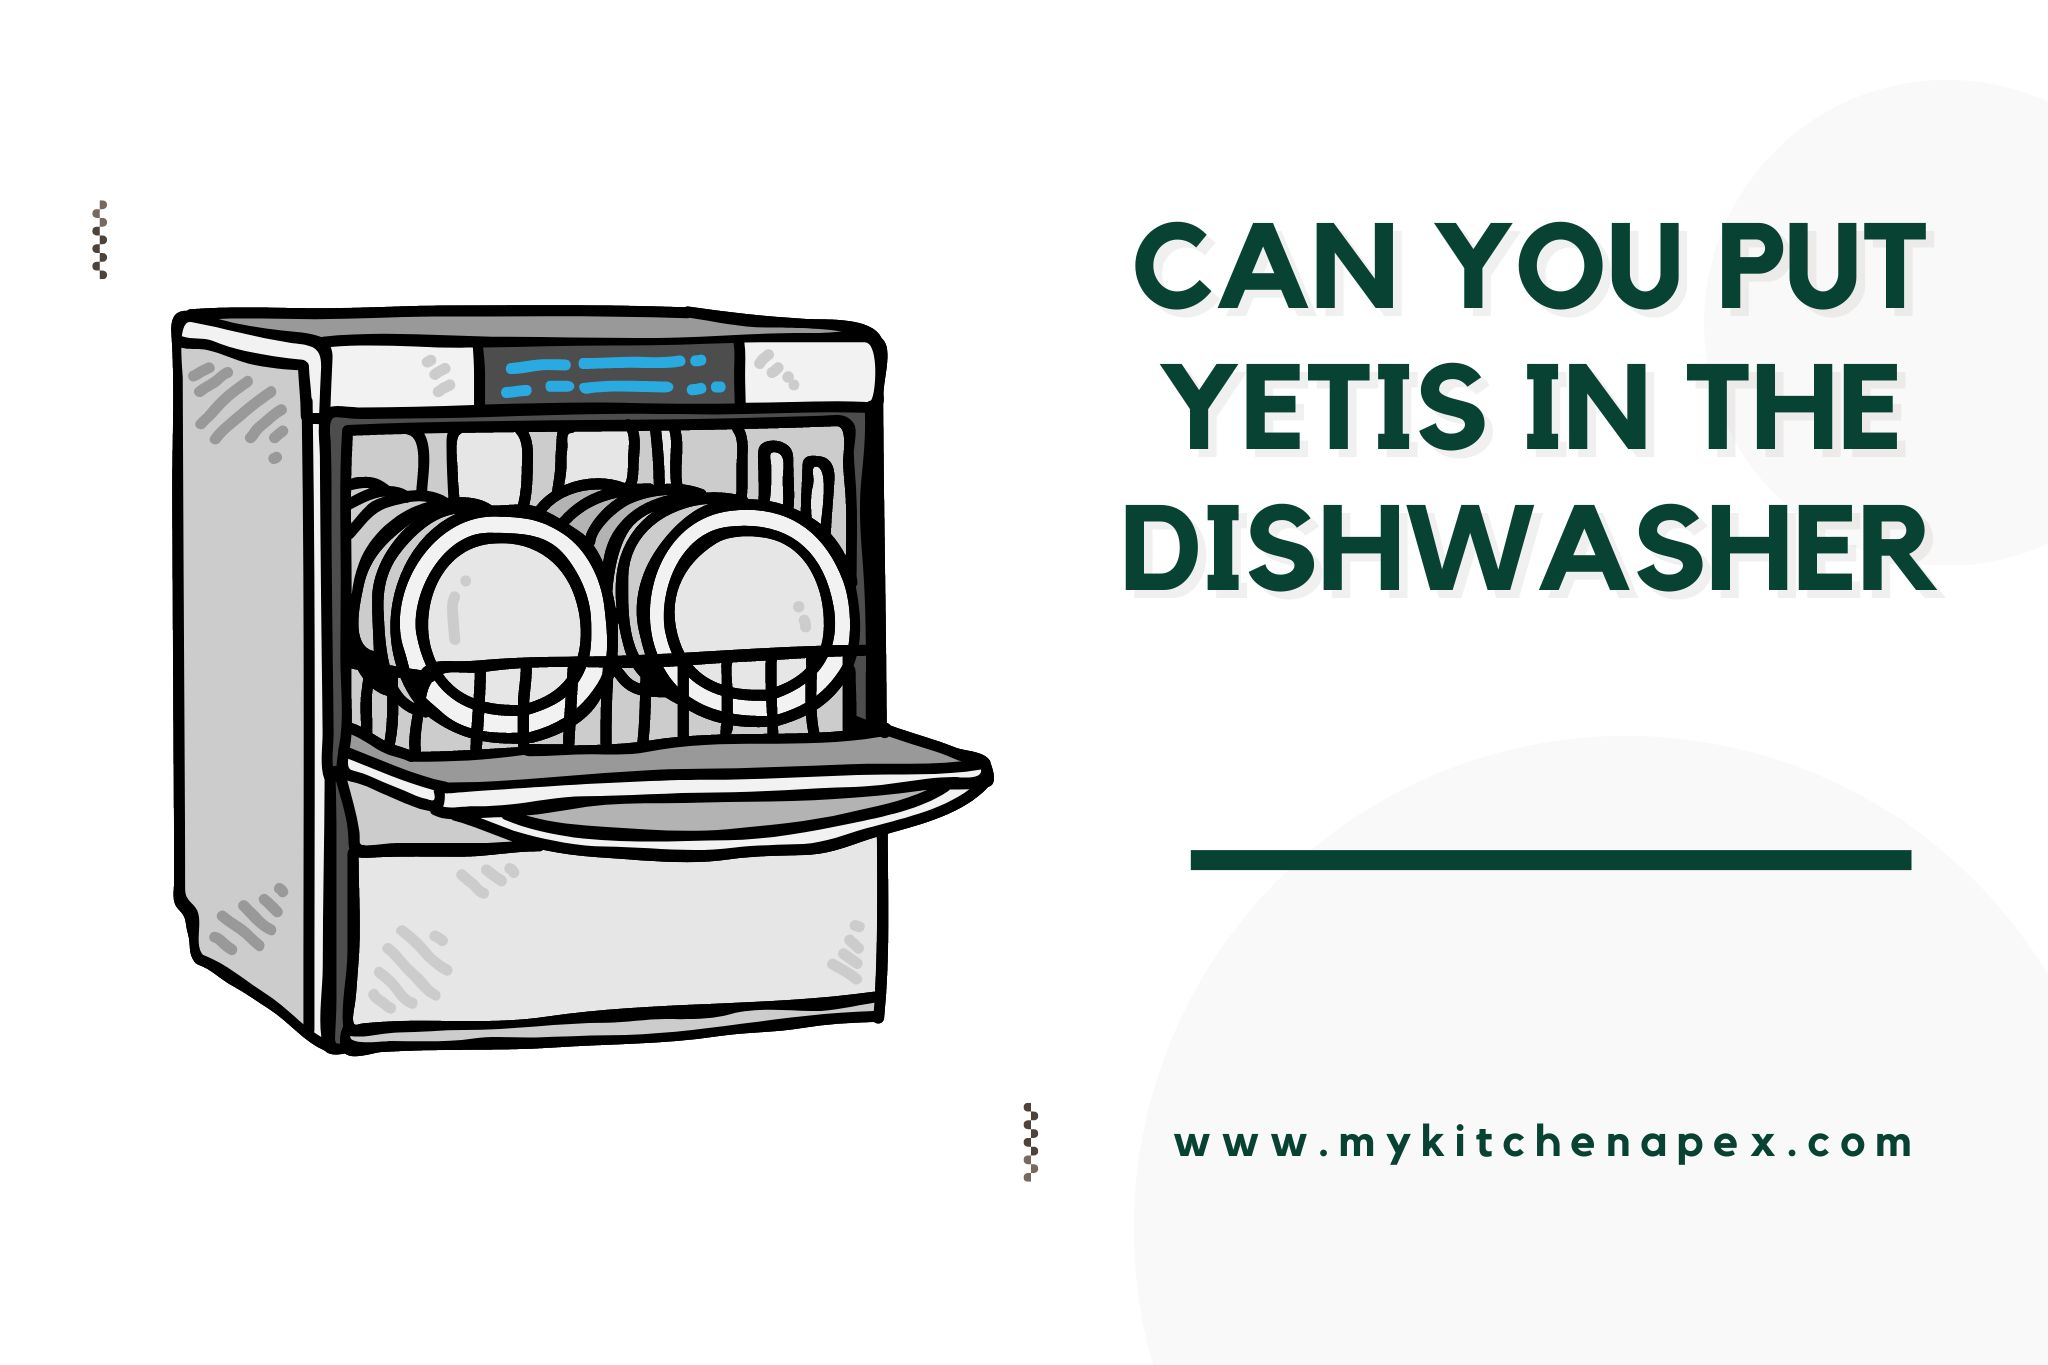 can you put yetis in the dishwasher